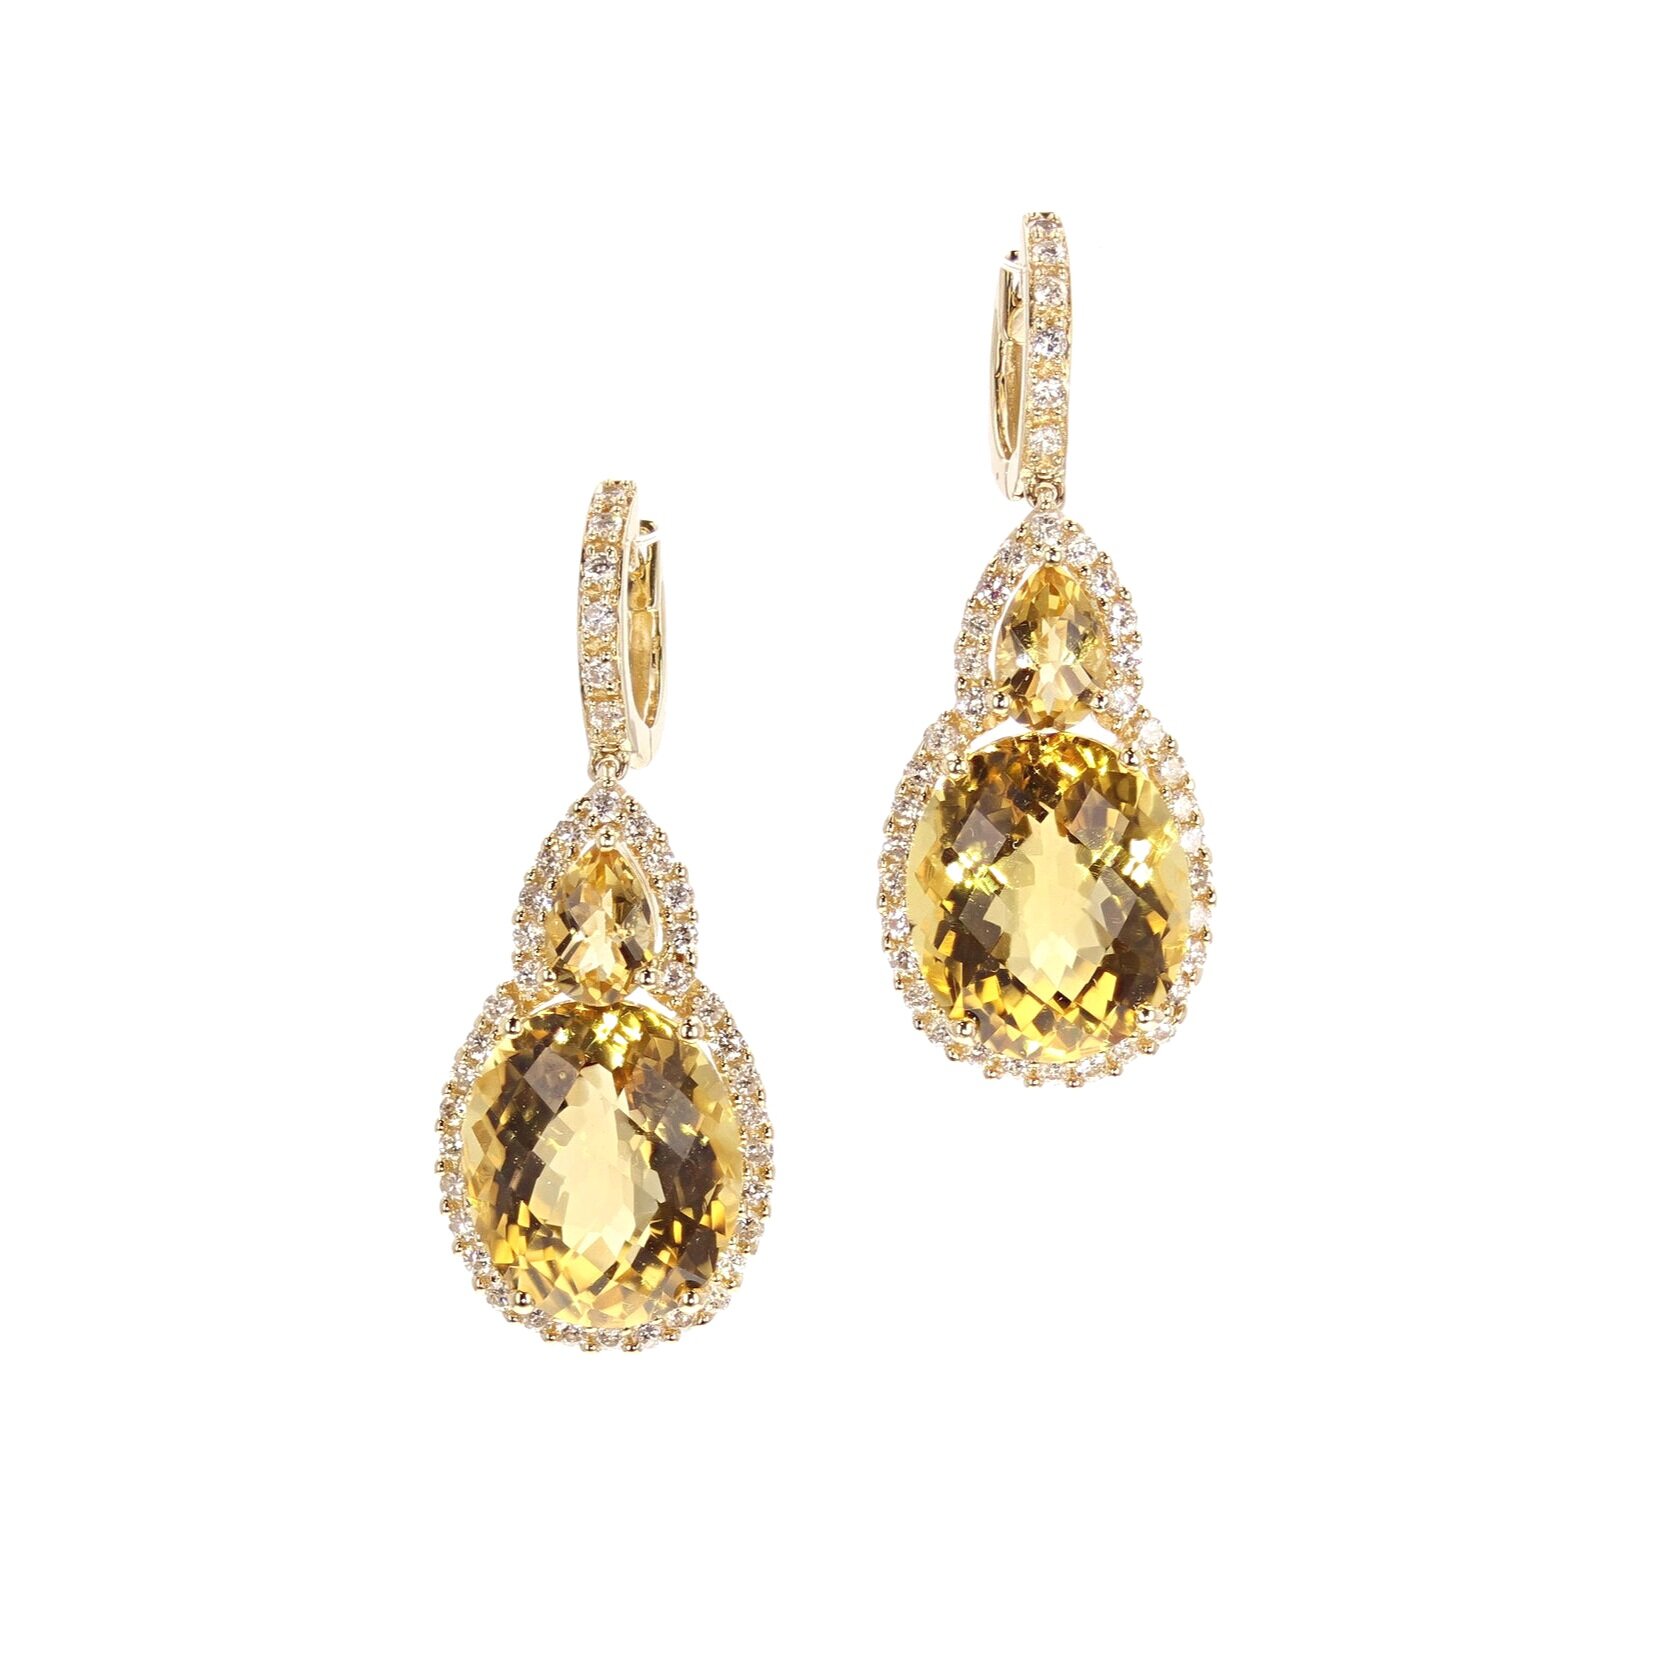 Citrine (10 carats) and Diamond (0.80 ctw.) 14K Gold drop earrings. $2995